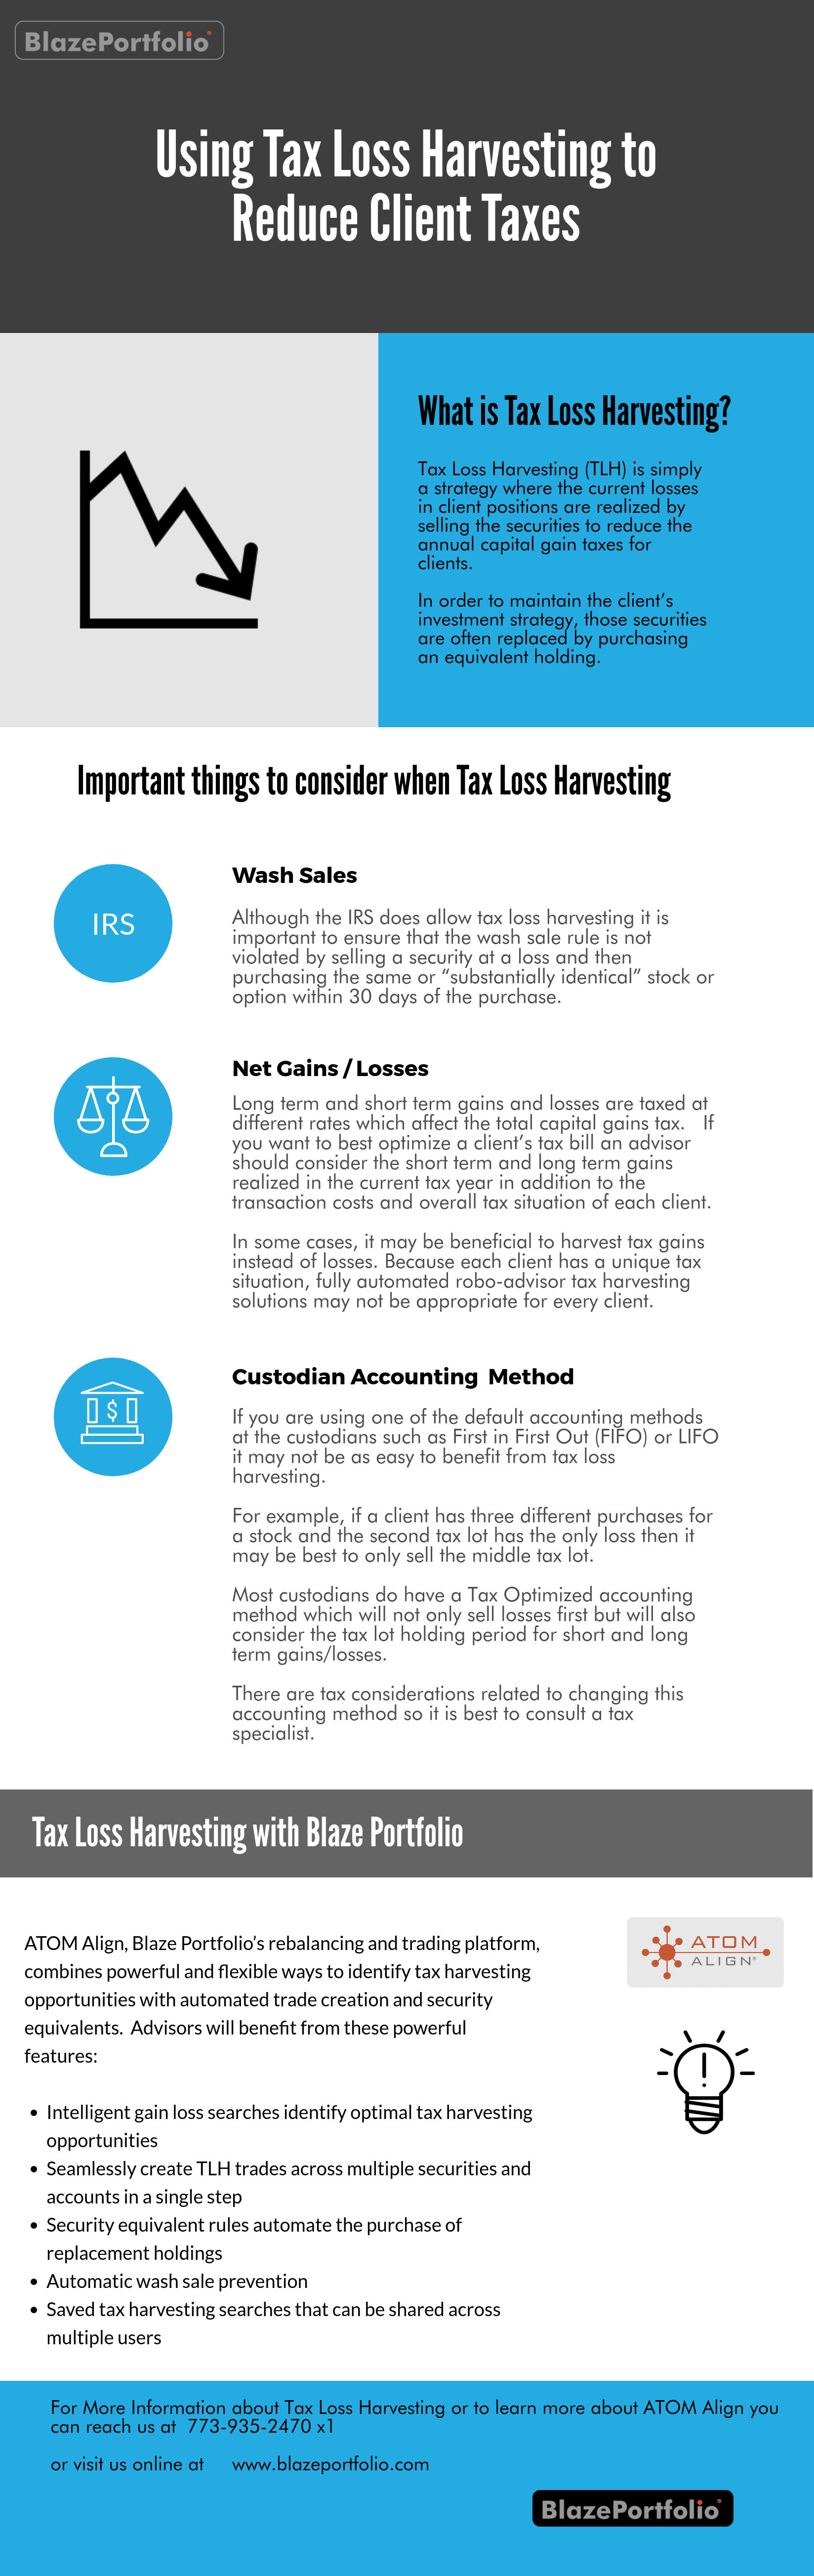 tax loss harvesting infographic